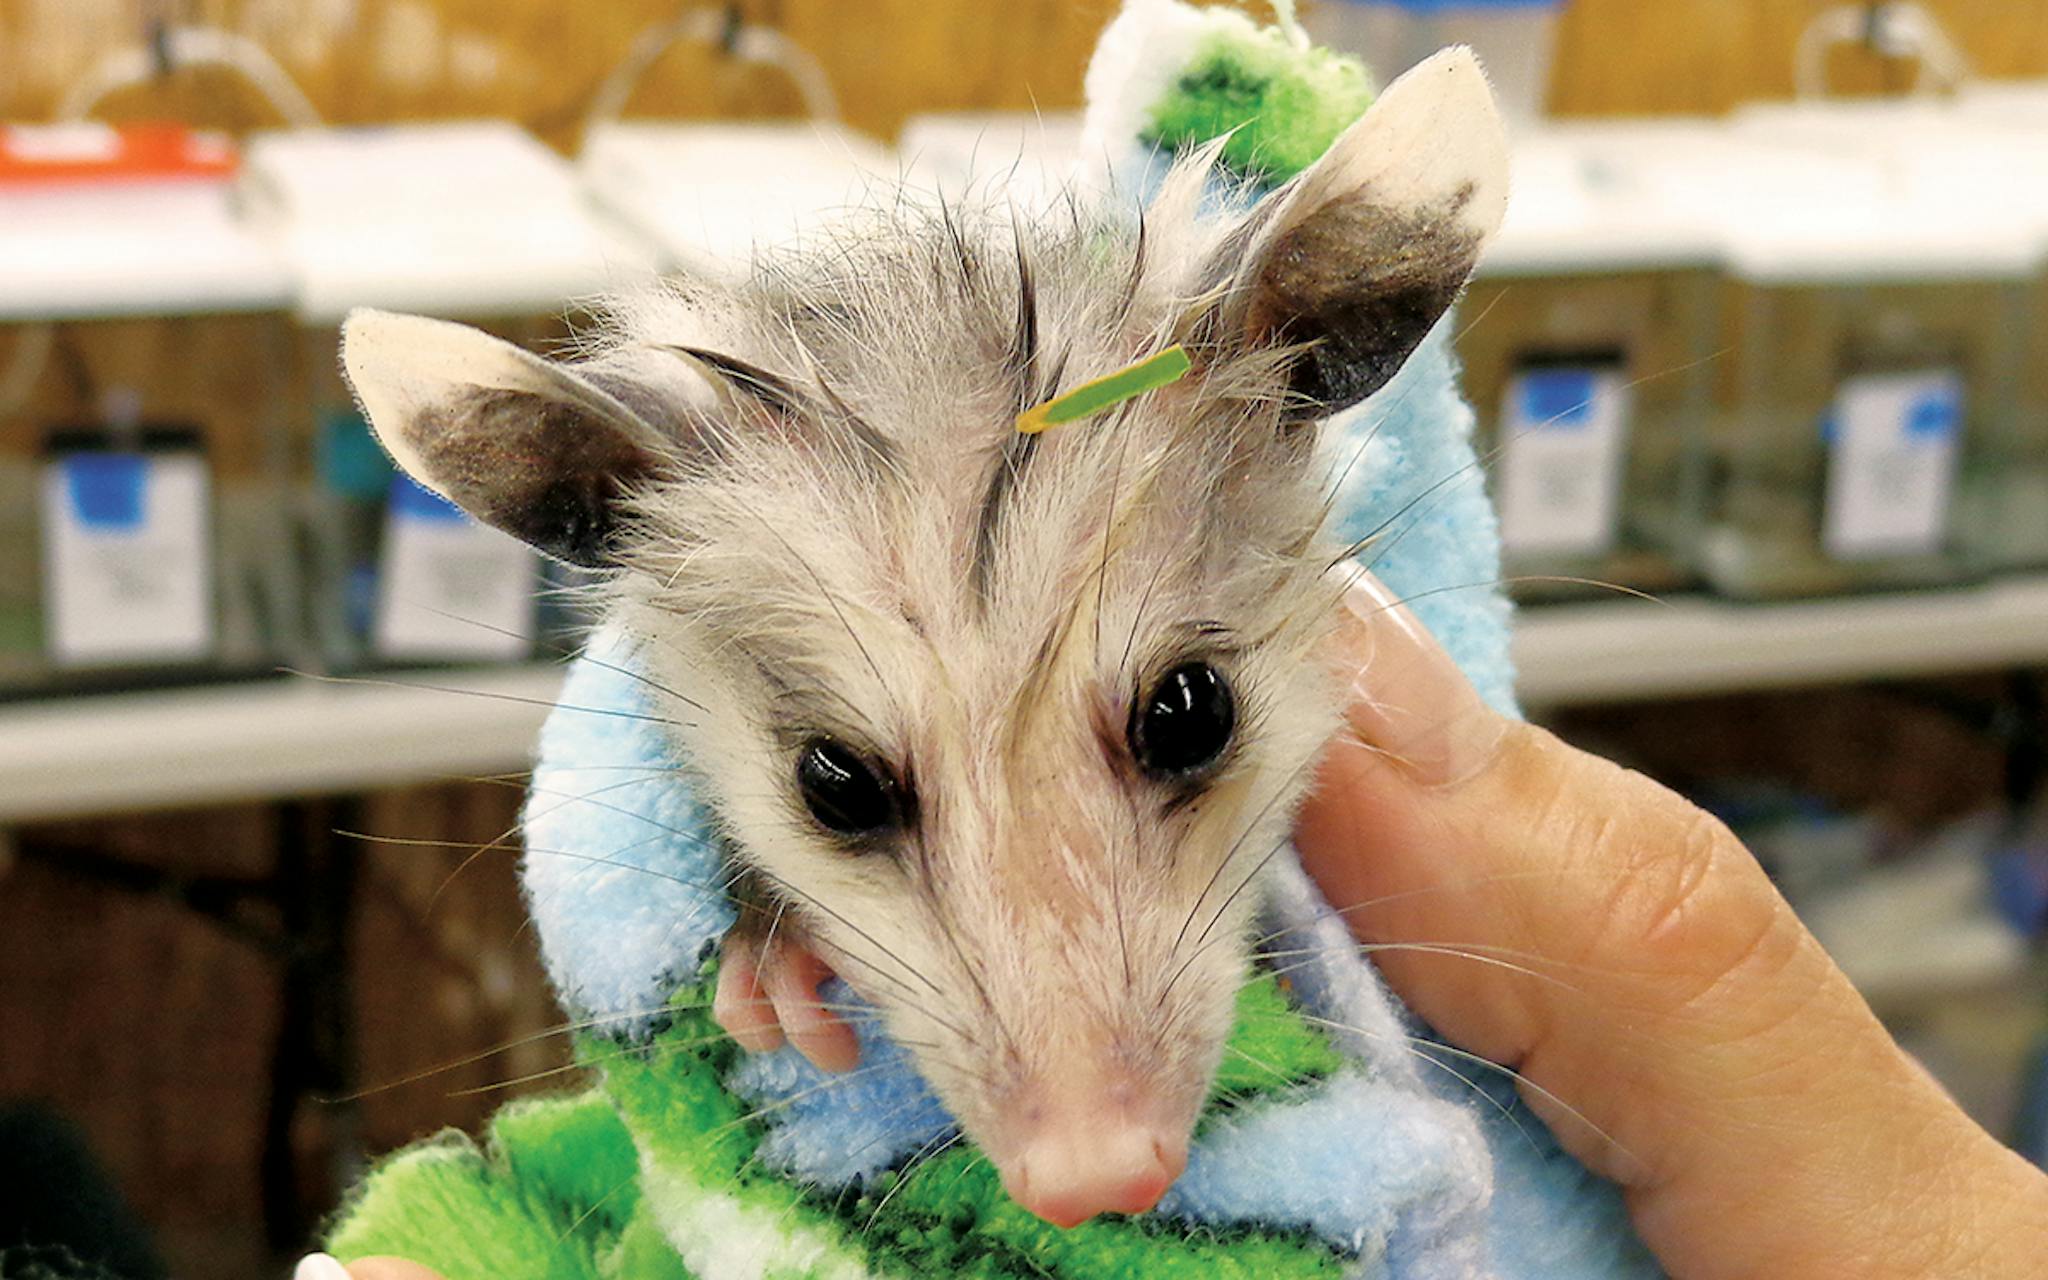 Swaddled baby opossum with wet fur from his bath.